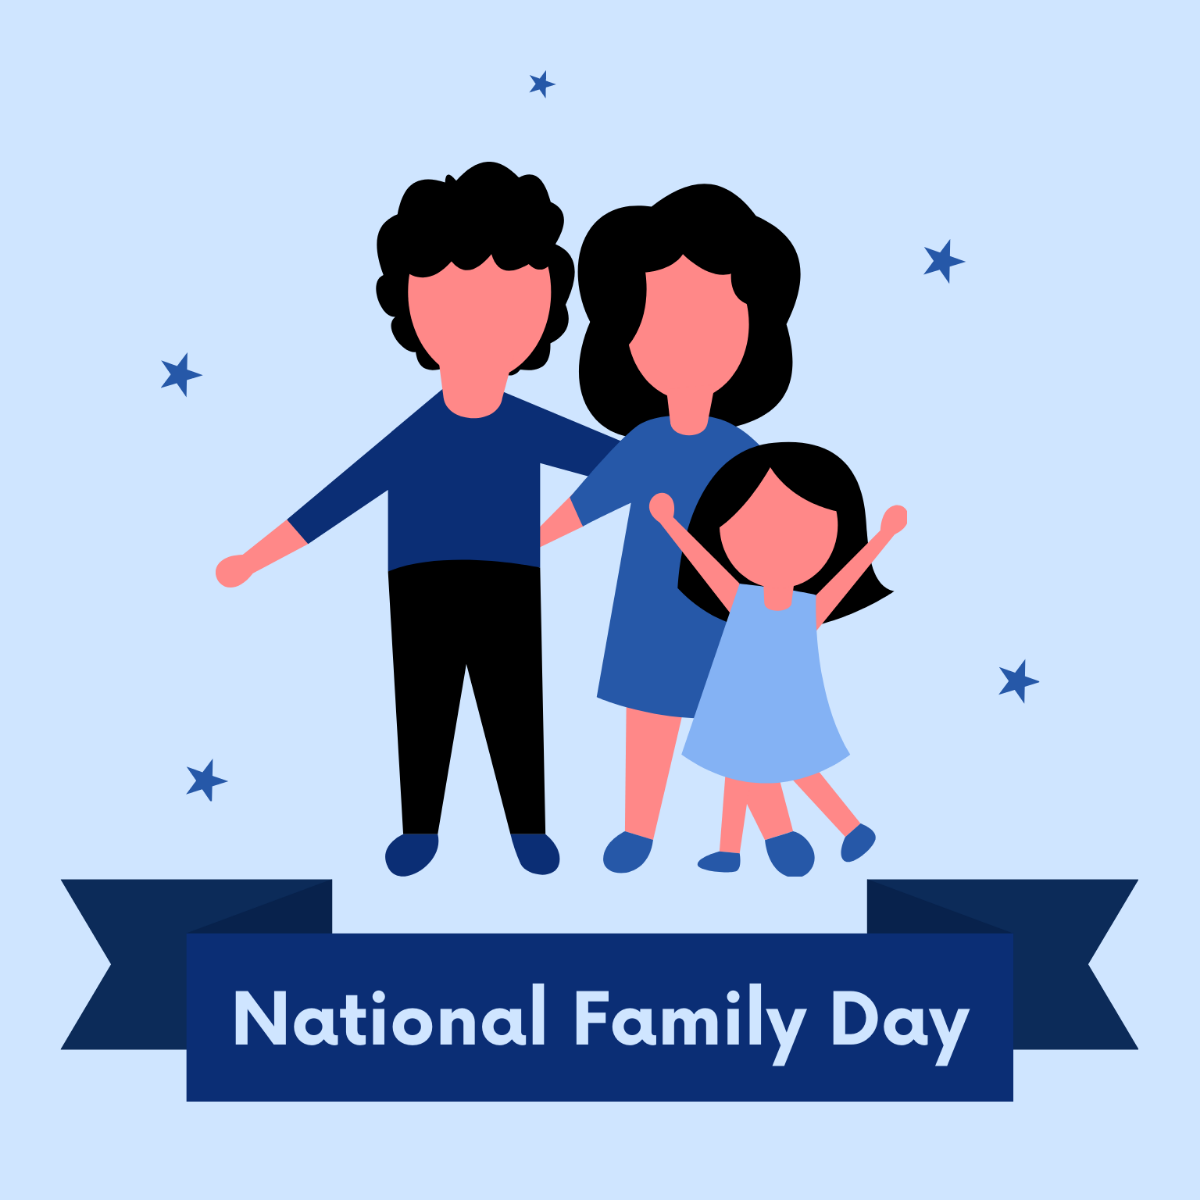 Free National Family Day Illustration Template